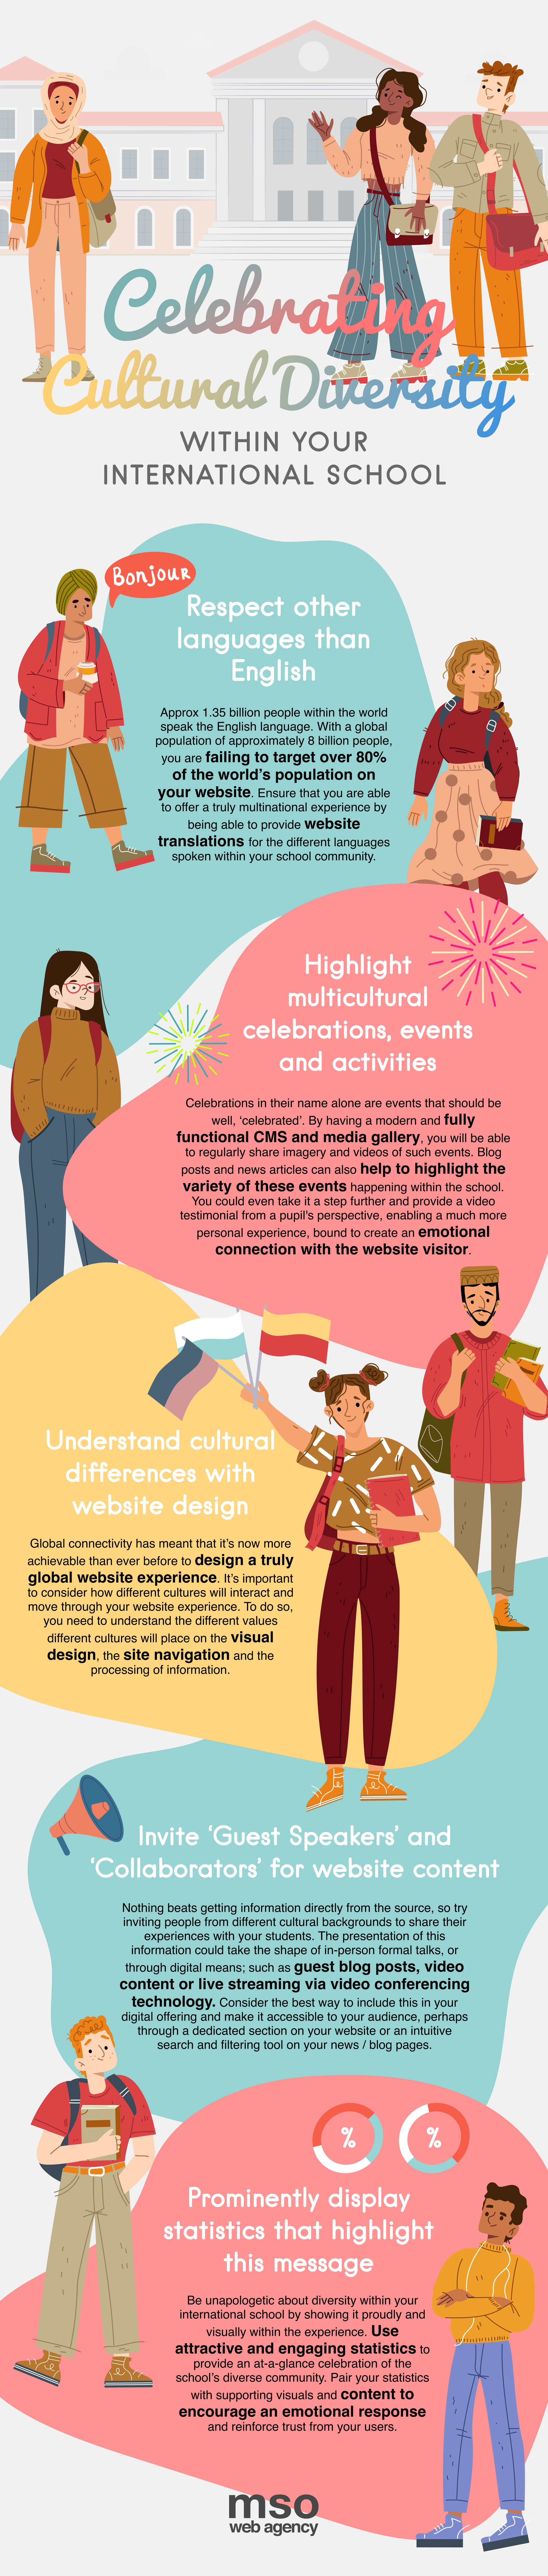 Infographic showing 5 ways to celebrate cultural diversity in your international school